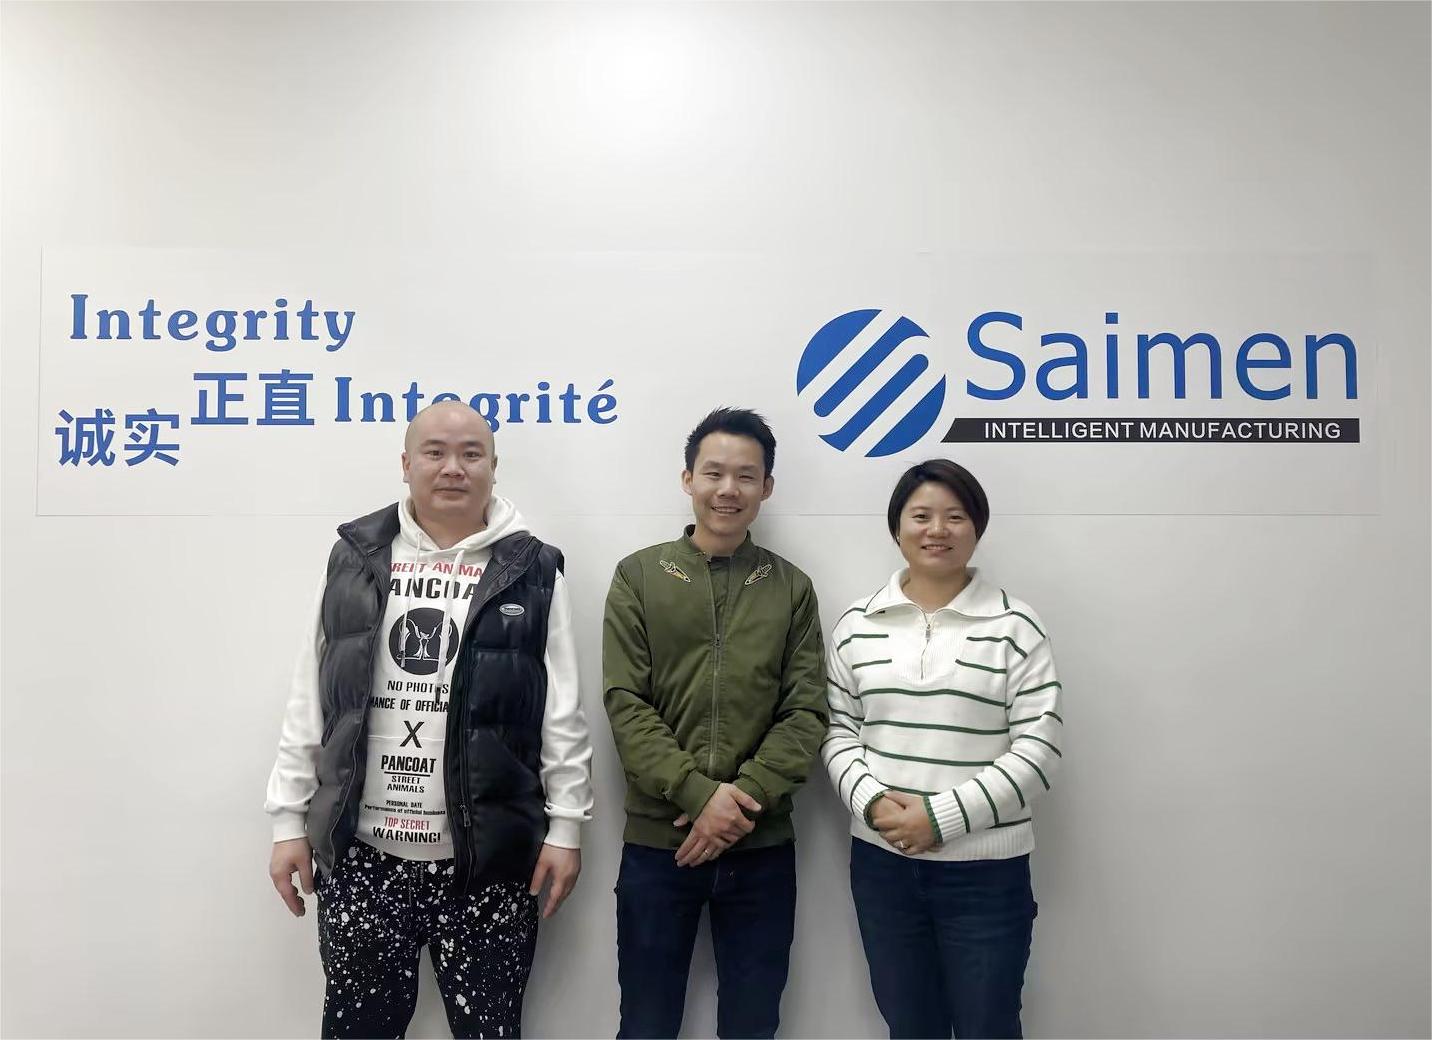 Saimen team with visiting clients in front of a wall showcasing the company’s commitment to integrity, highlighting successful global partnerships.